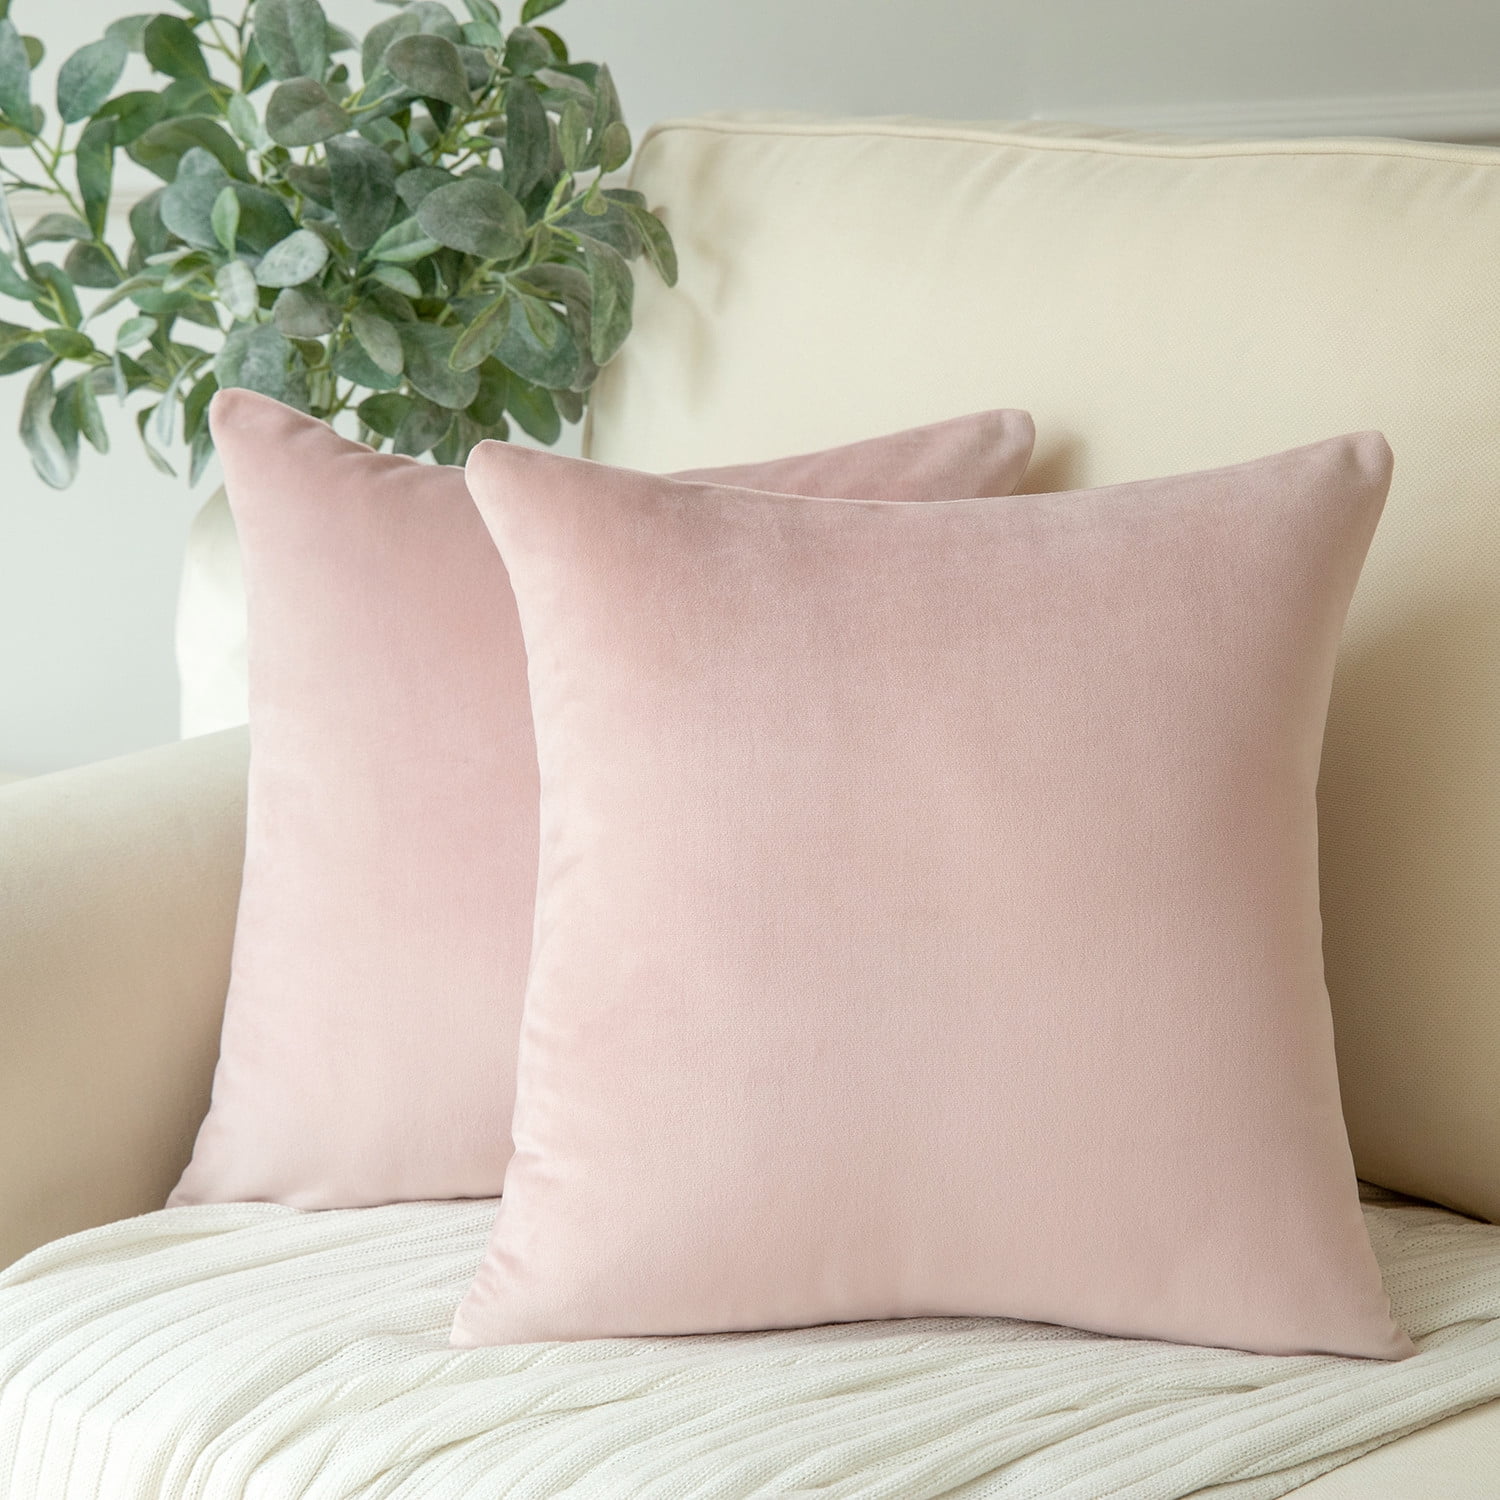  ETASOP Throw Pillows with Inserts Included 18x18, 2 Pack Velvet  Striped Pillow Covers with Inserts Farmhouse Home Decor (Light Pink) : Home  & Kitchen